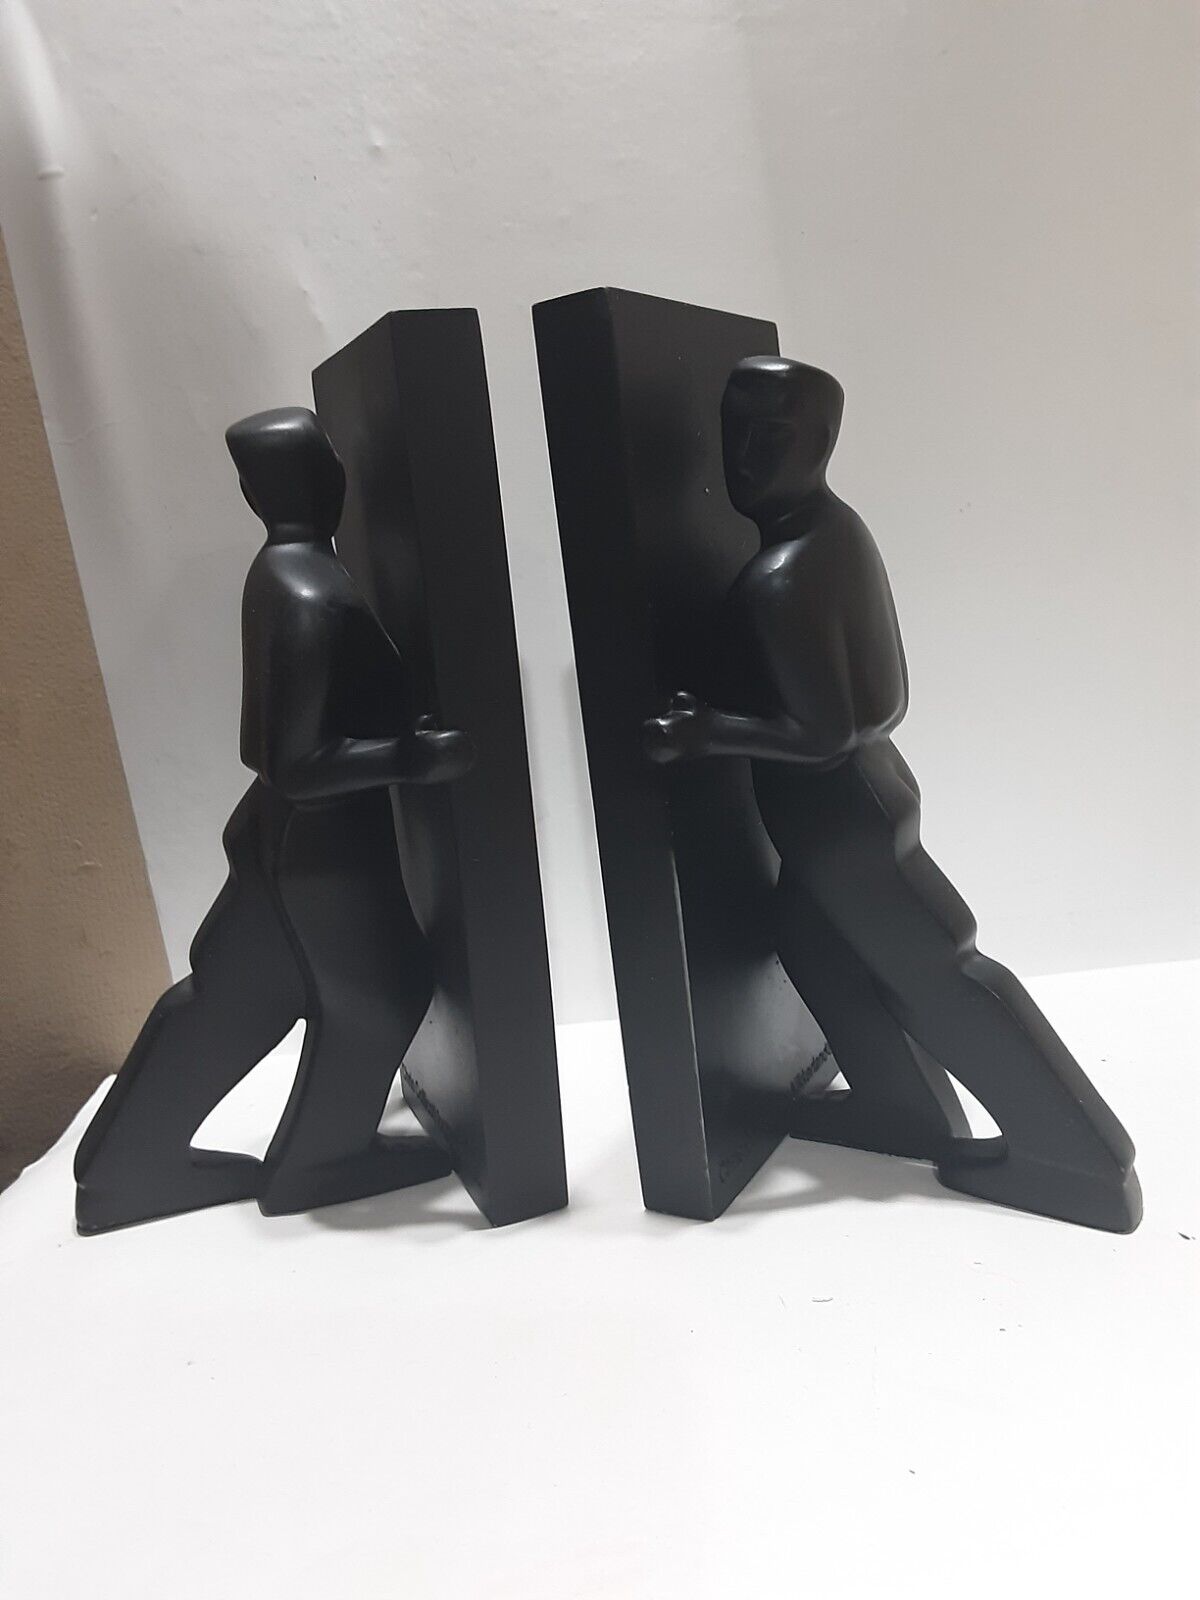 EXTREME MODERNIST CUBIST,CHRIS COLLICOTT BLACK HARD RESIN PAIR OF BOOKENDS